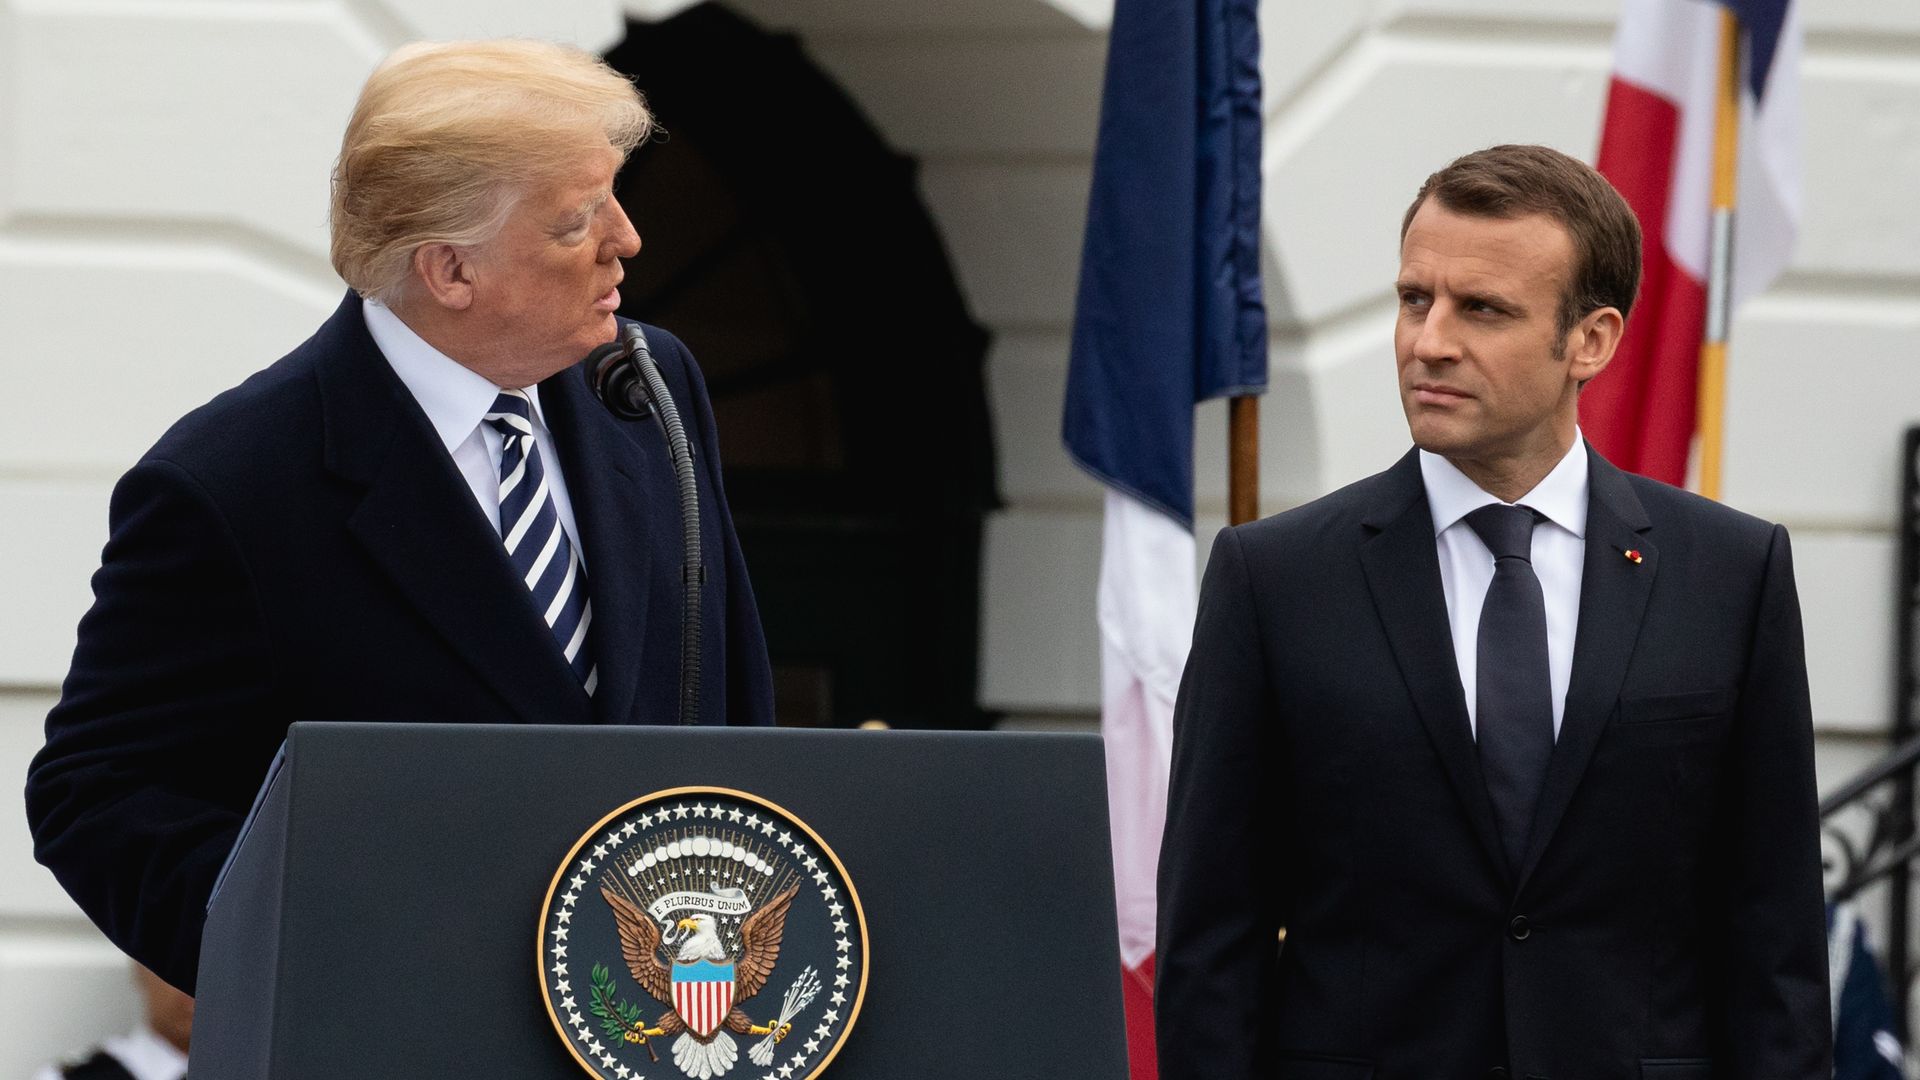 Emmanuel Macron at an event with Trump